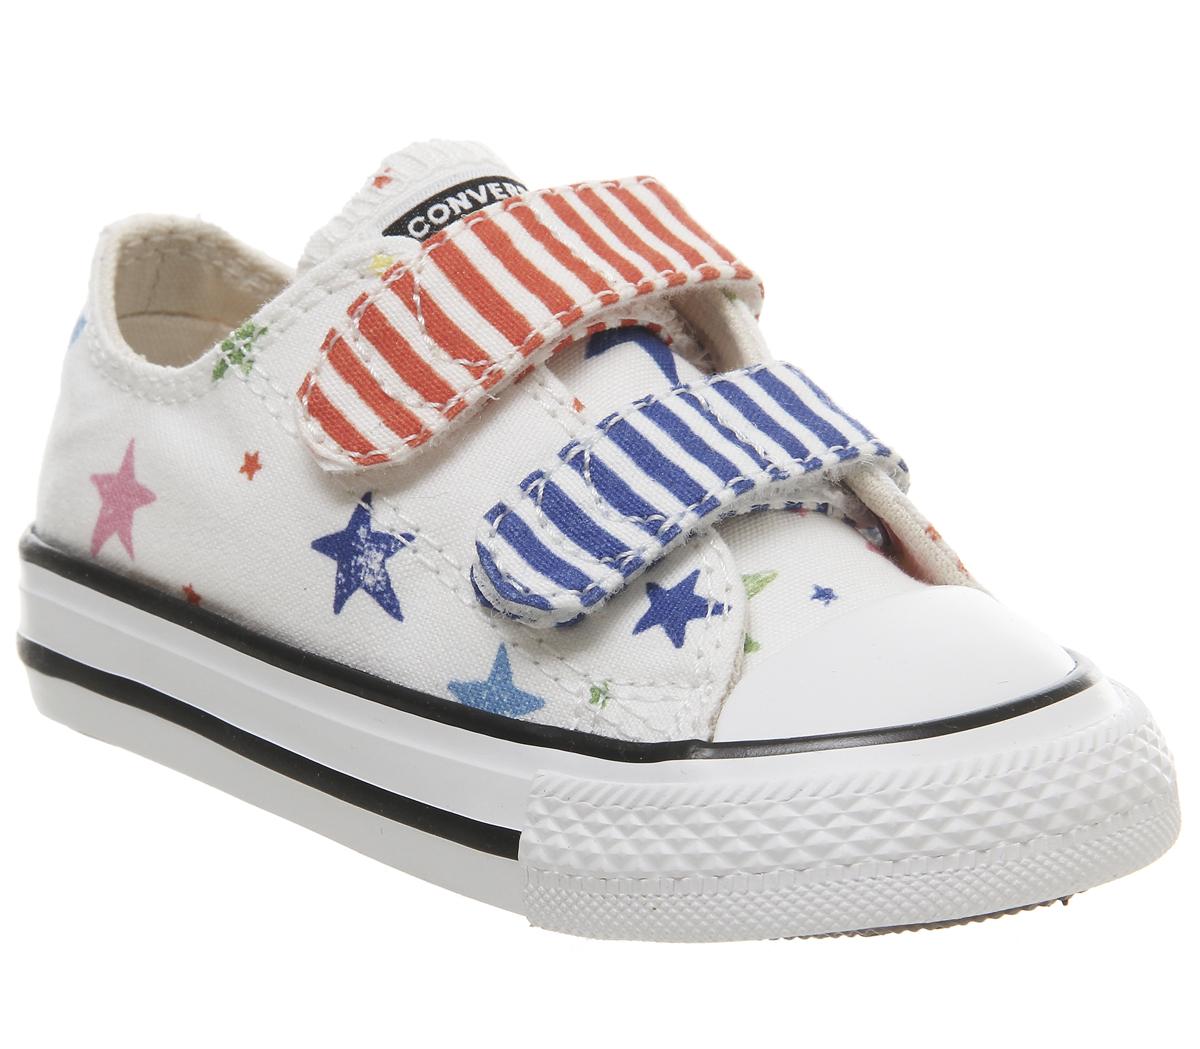 ConverseAll Star 2vlace TrainersNoe And Zoe Multi Stars